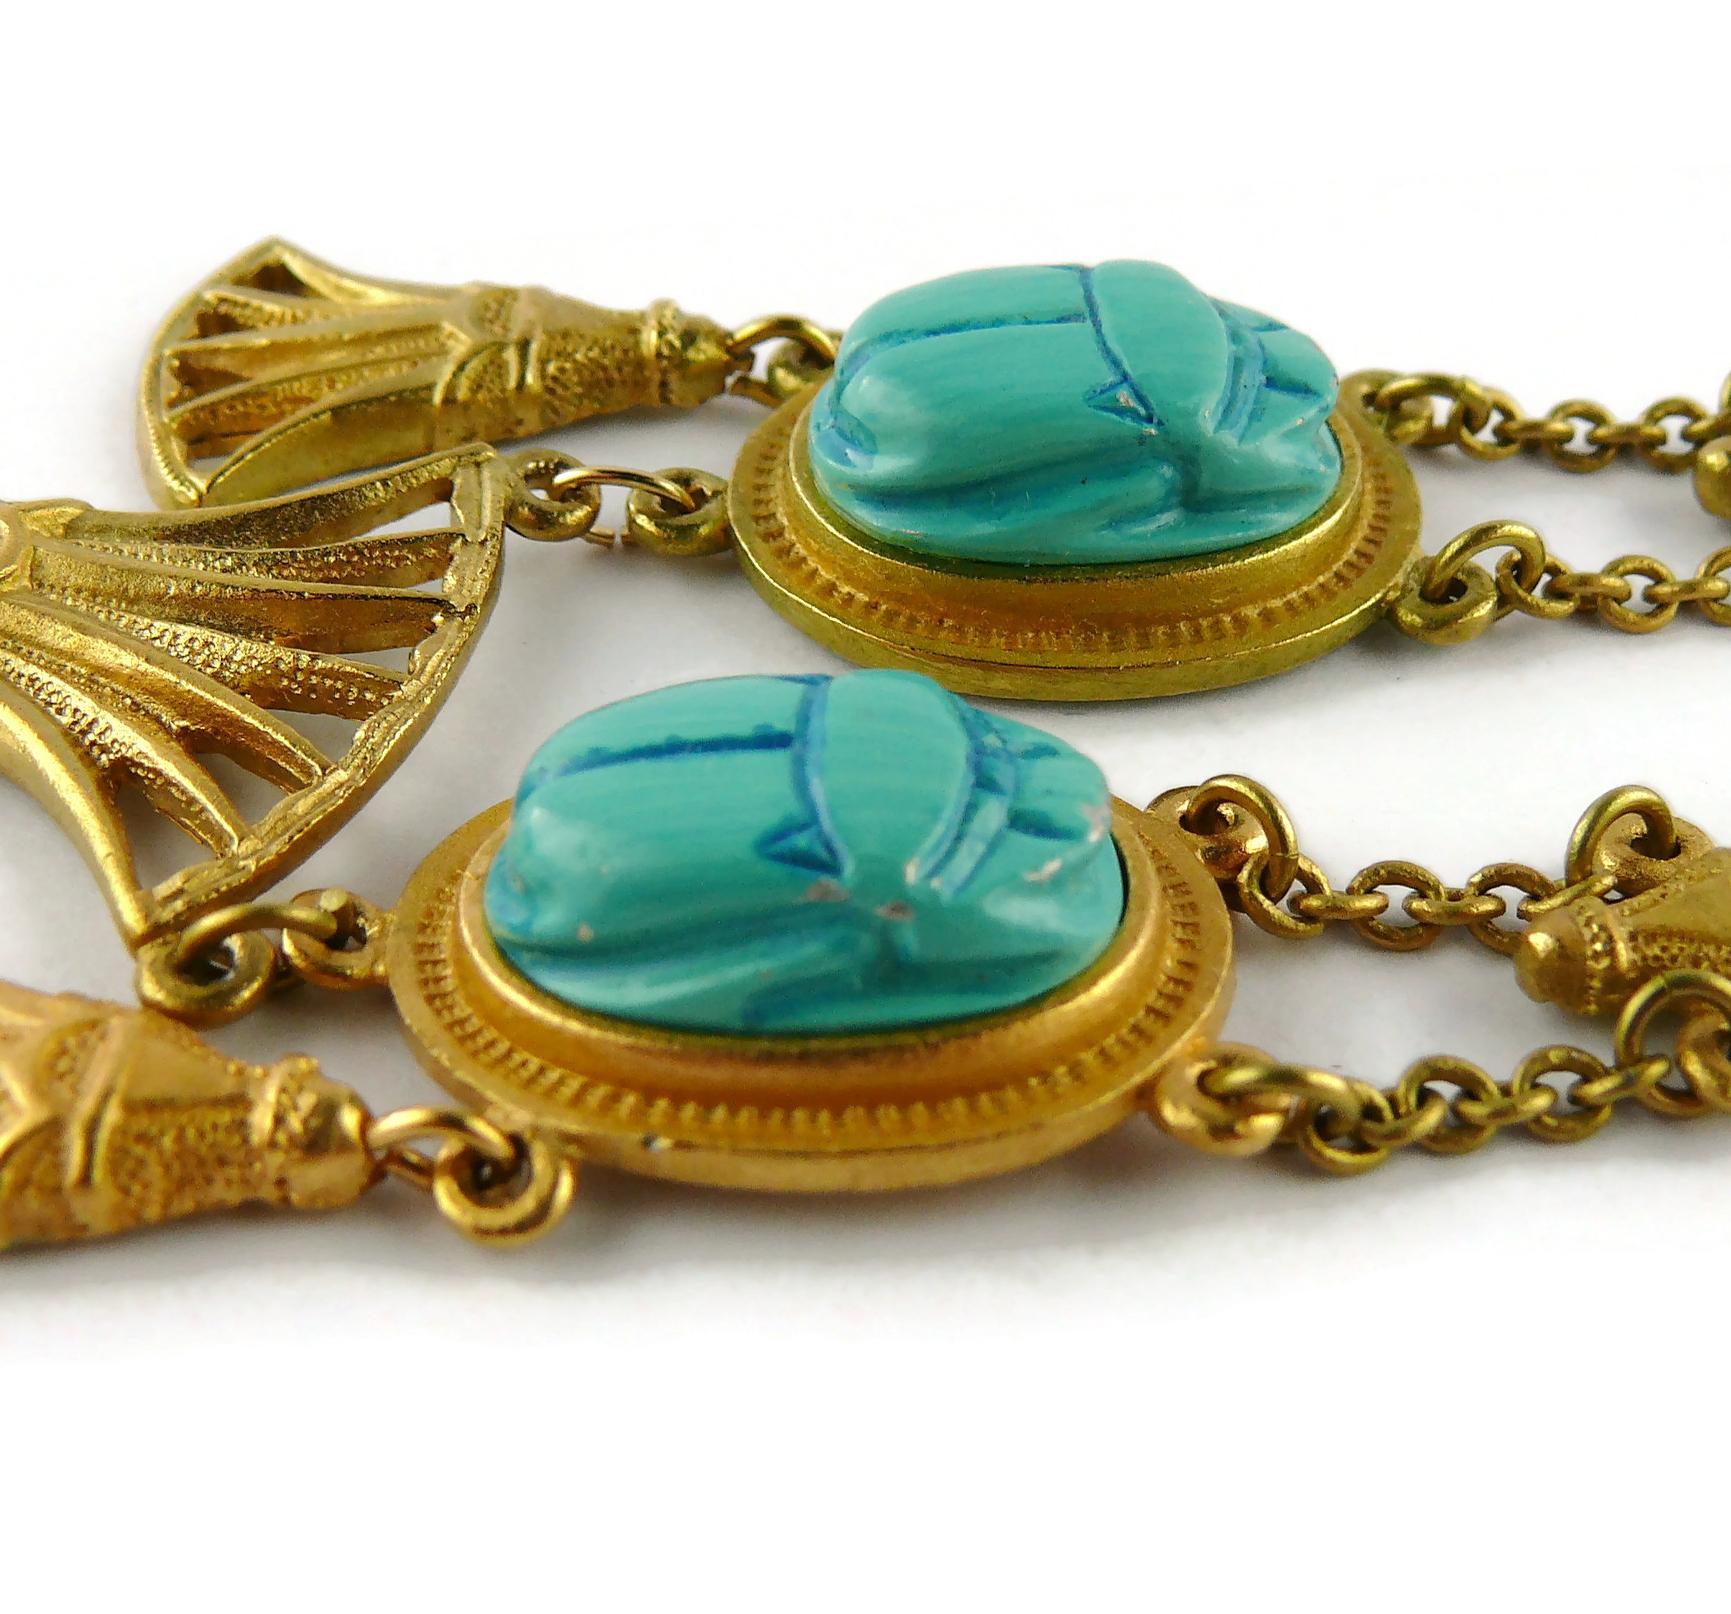 Christian Dior Egyptian Revival Faux Turquoise Scarab Necklace 9